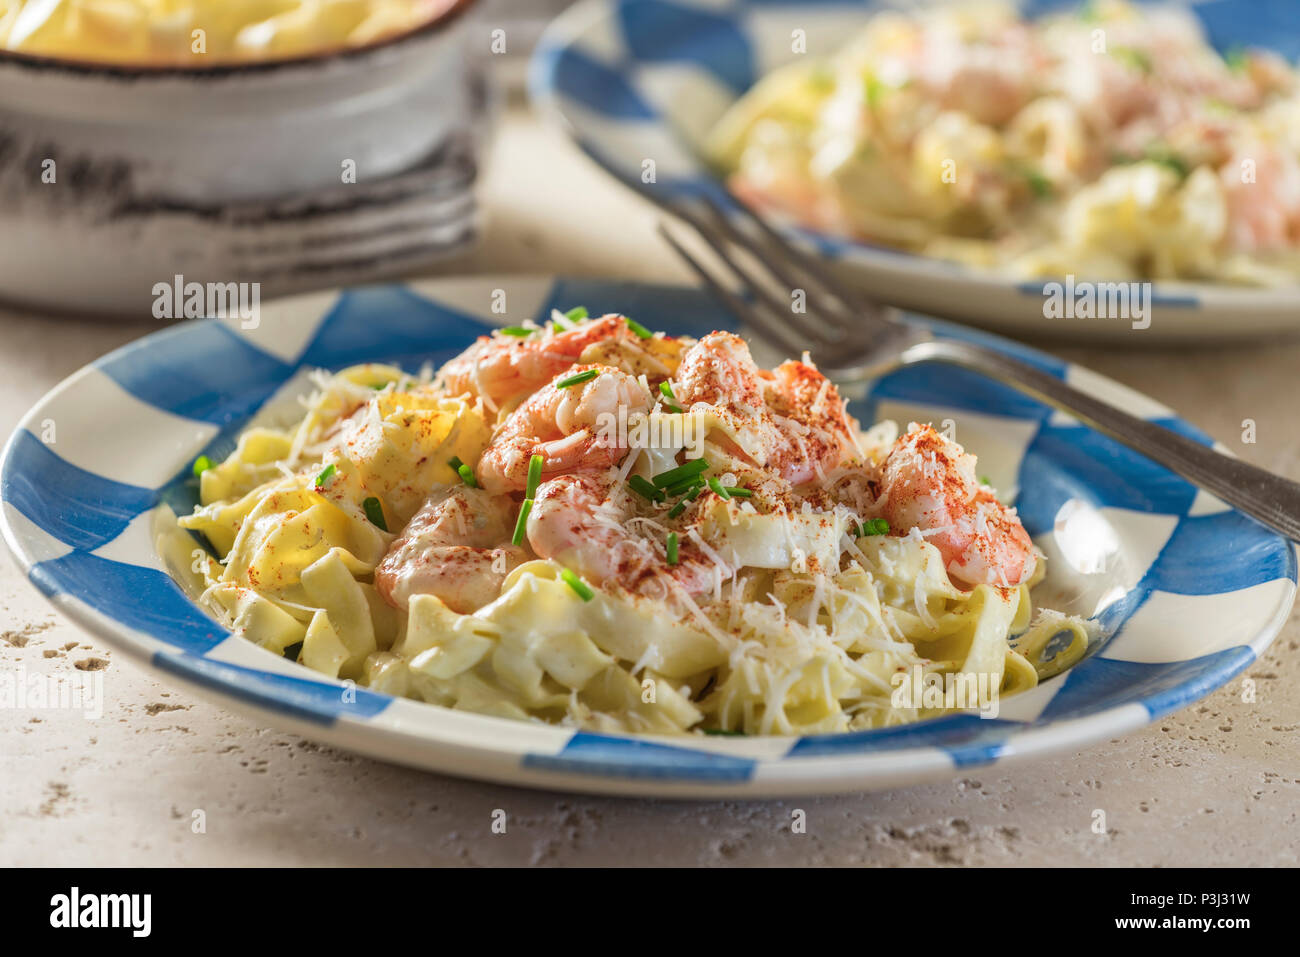 Shrimp Fettuccine Alfredo. Pasta in cheese and butter sauce with prawns. Stock Photo